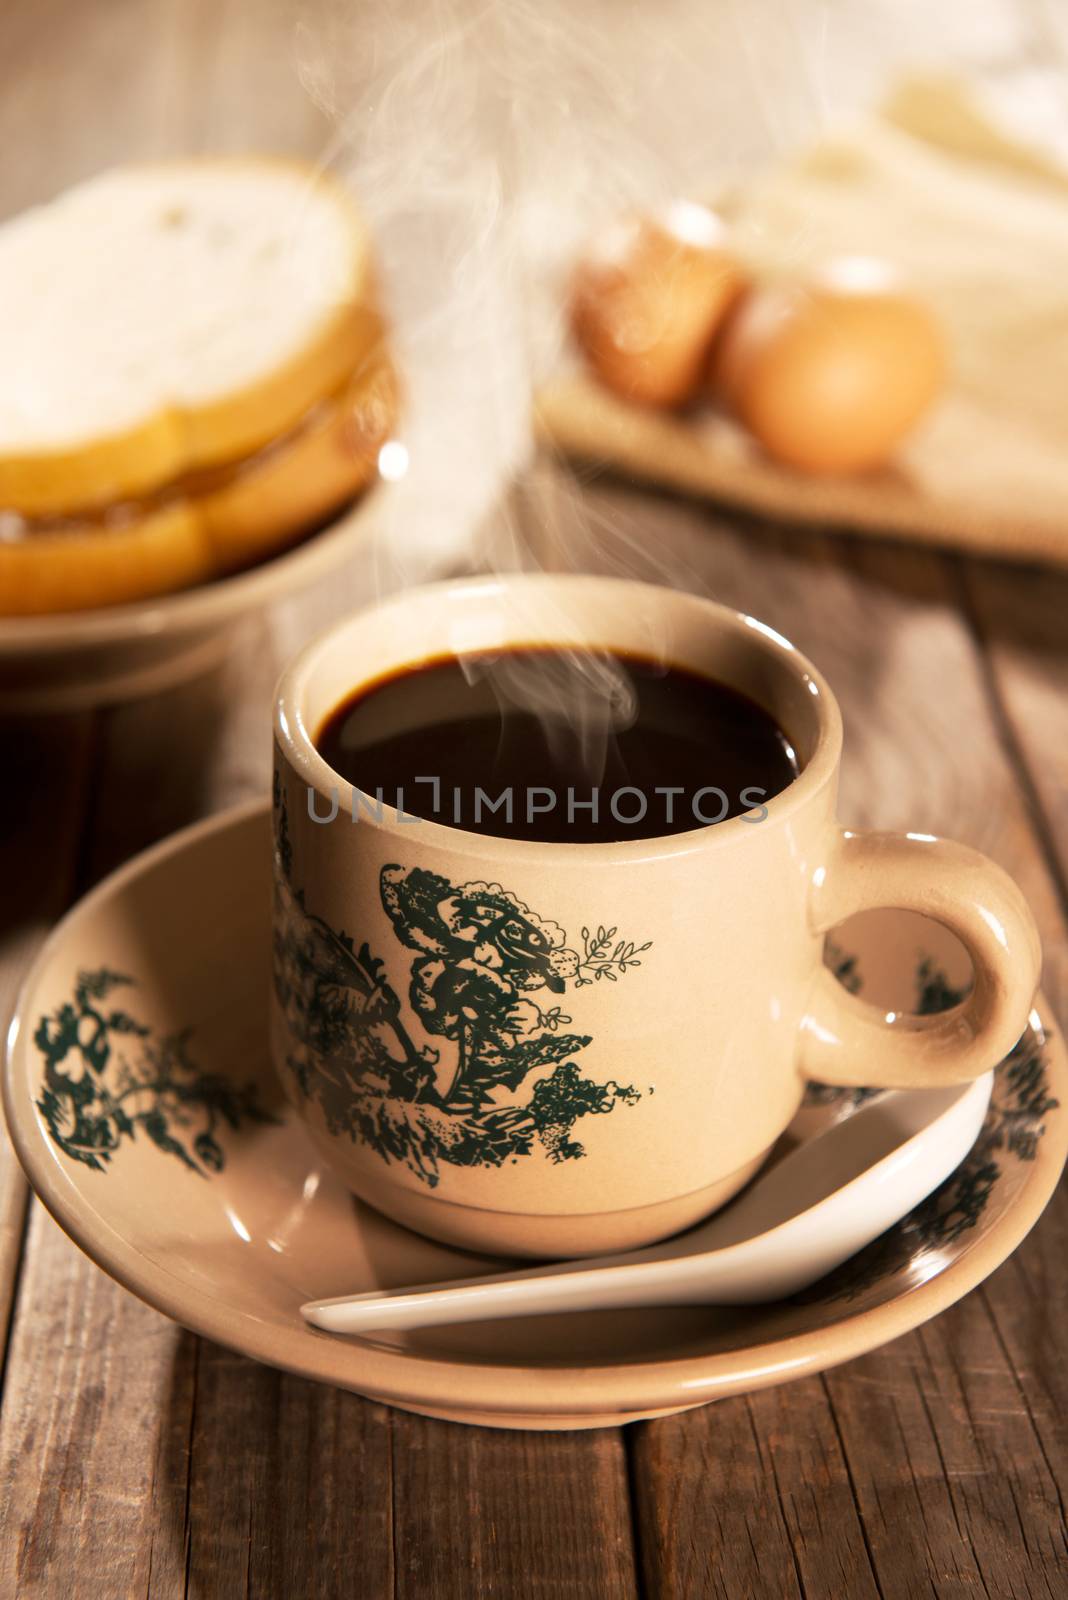 Traditional Chinese style coffee in vintage mug and saucer with breakfast. Fractal on the cup is generic print. Soft focus dramatic ambient light over wood table.